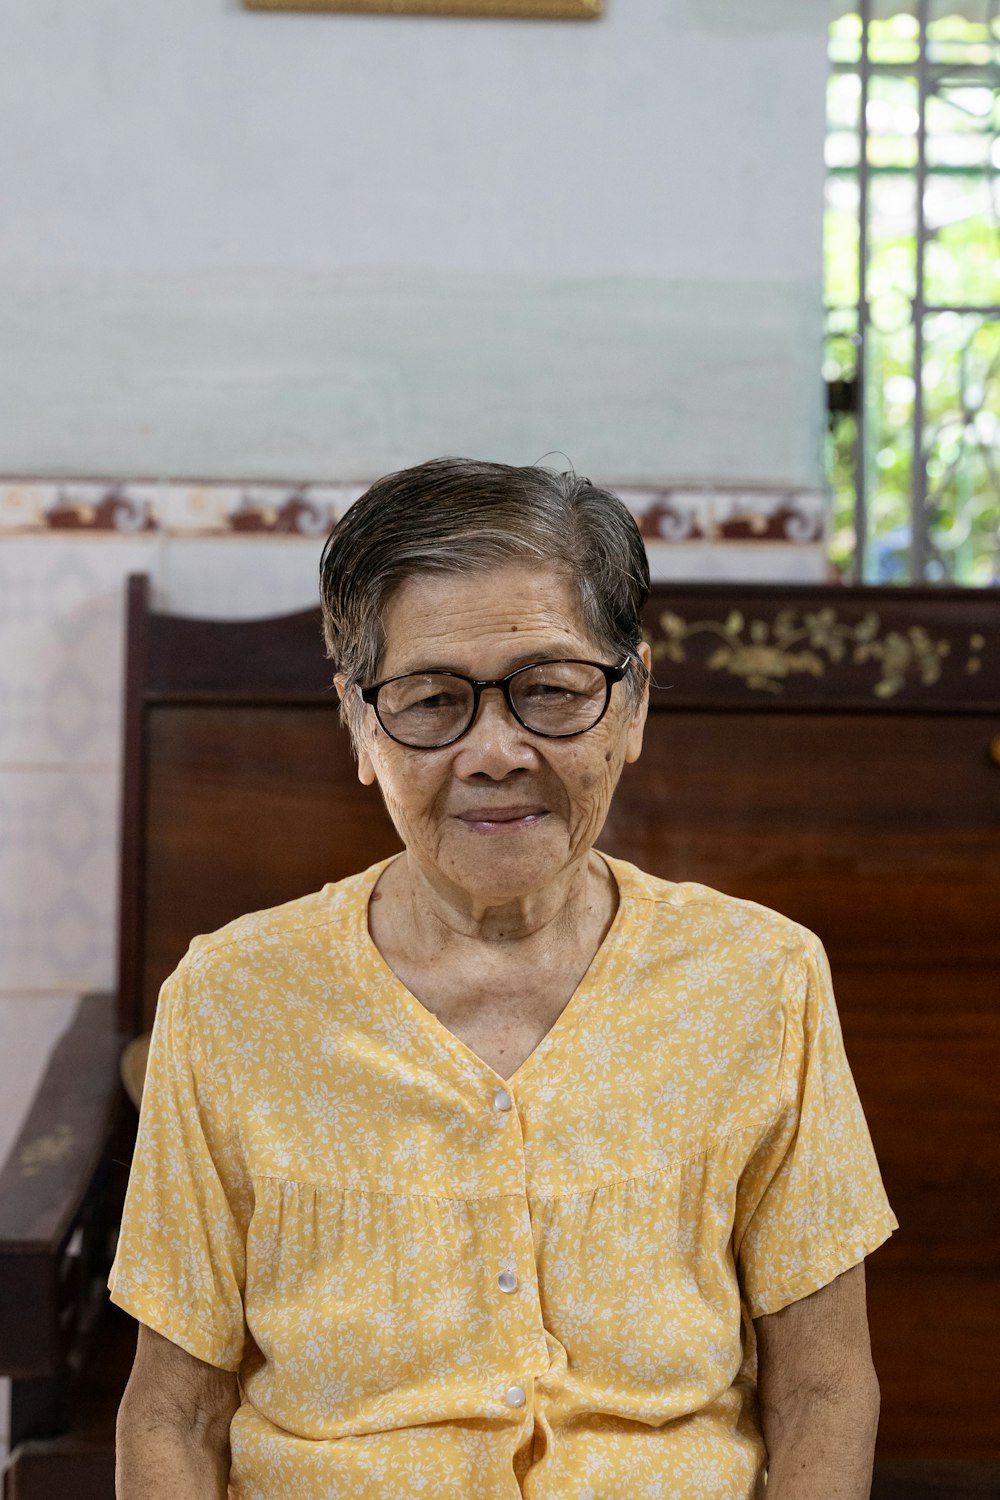 an elderly woman sitting on a bench in a church